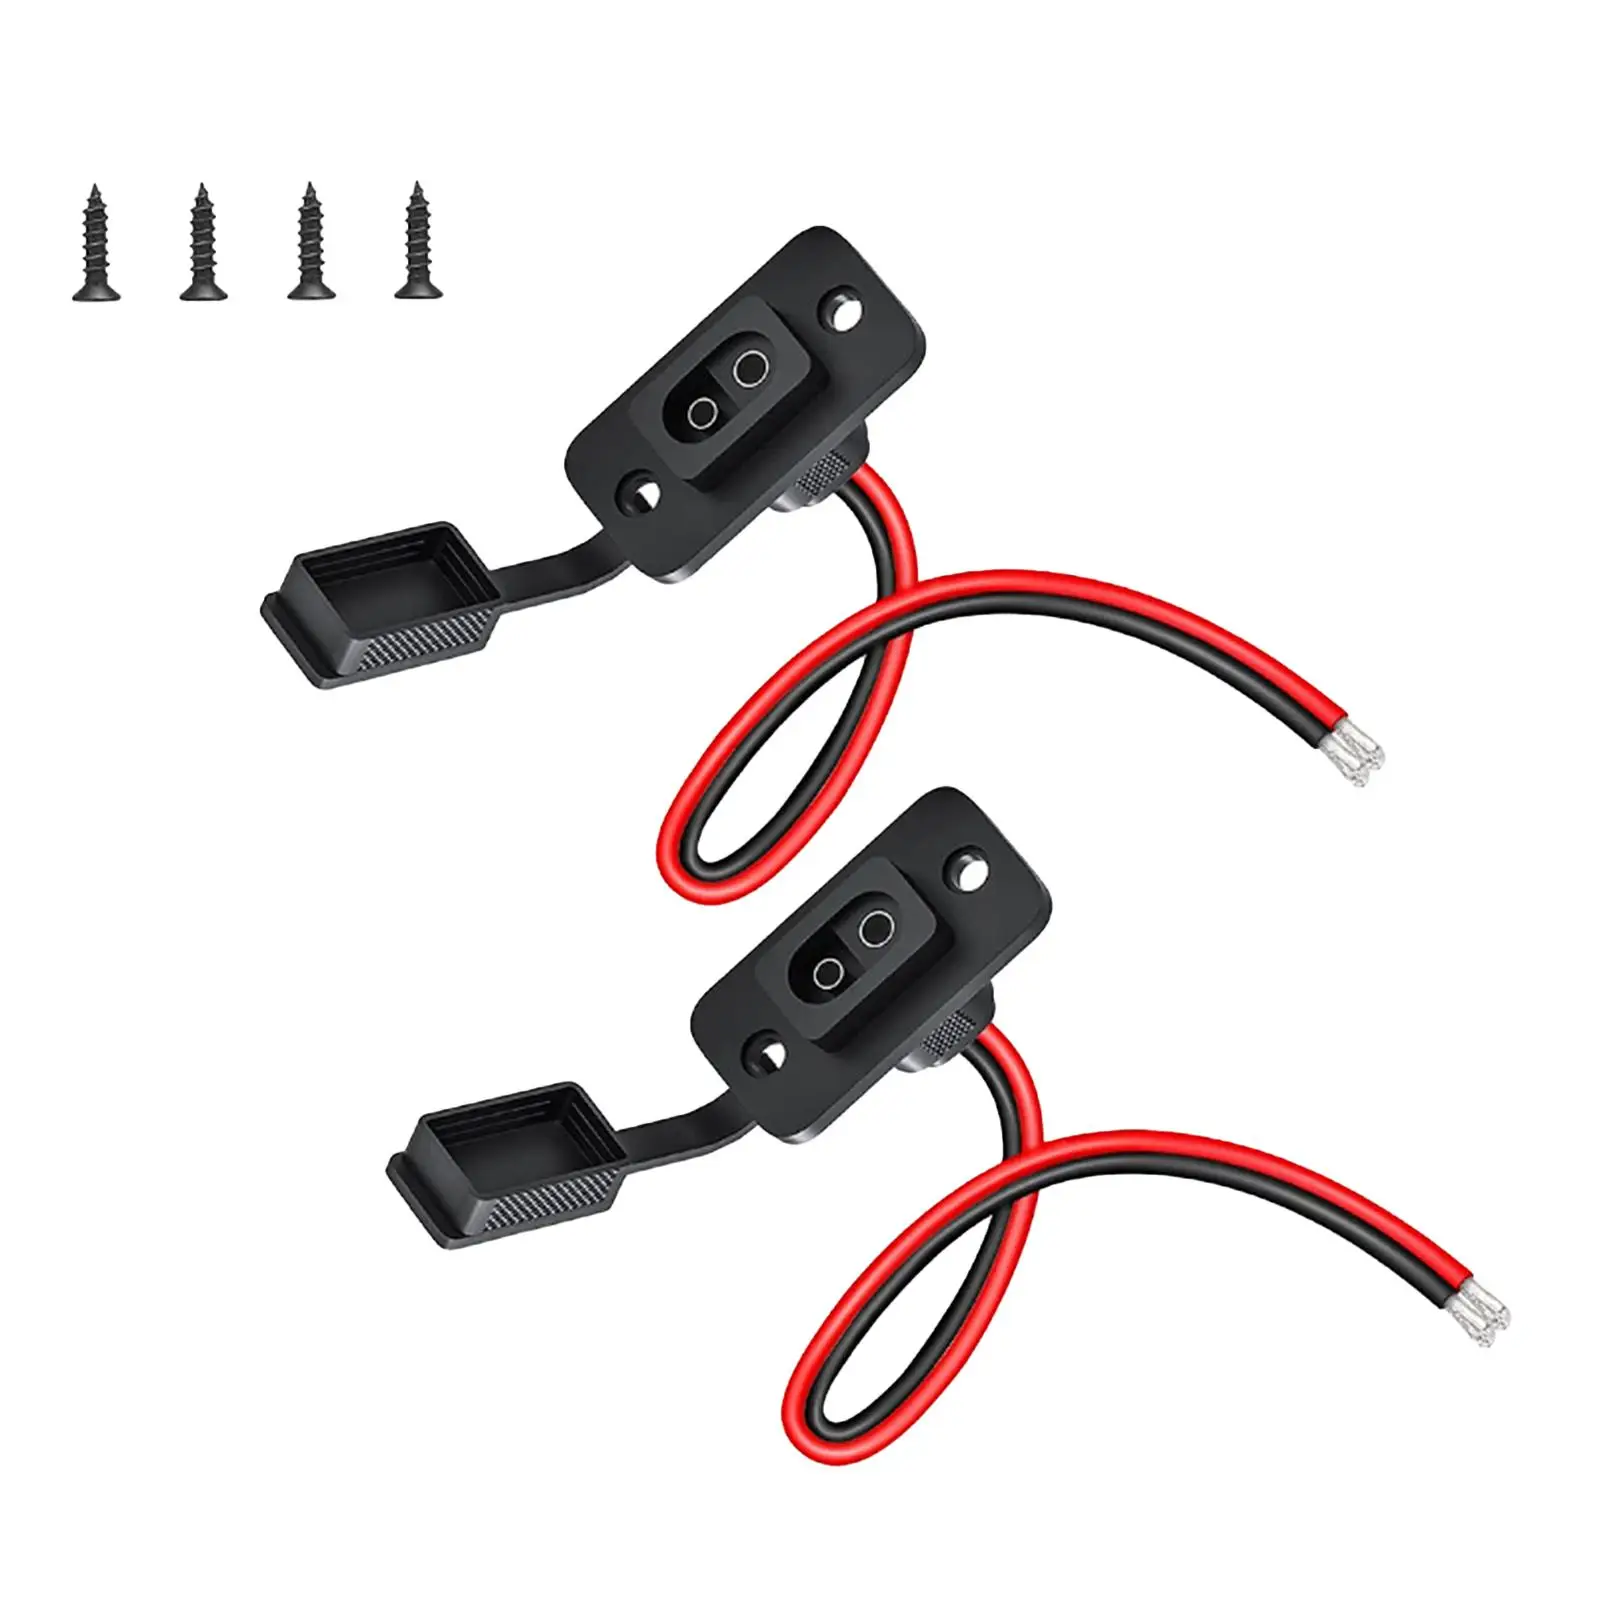 2x SAE Socket DC Power Automotive Accessory 30A Cars Tractor Battery Cables